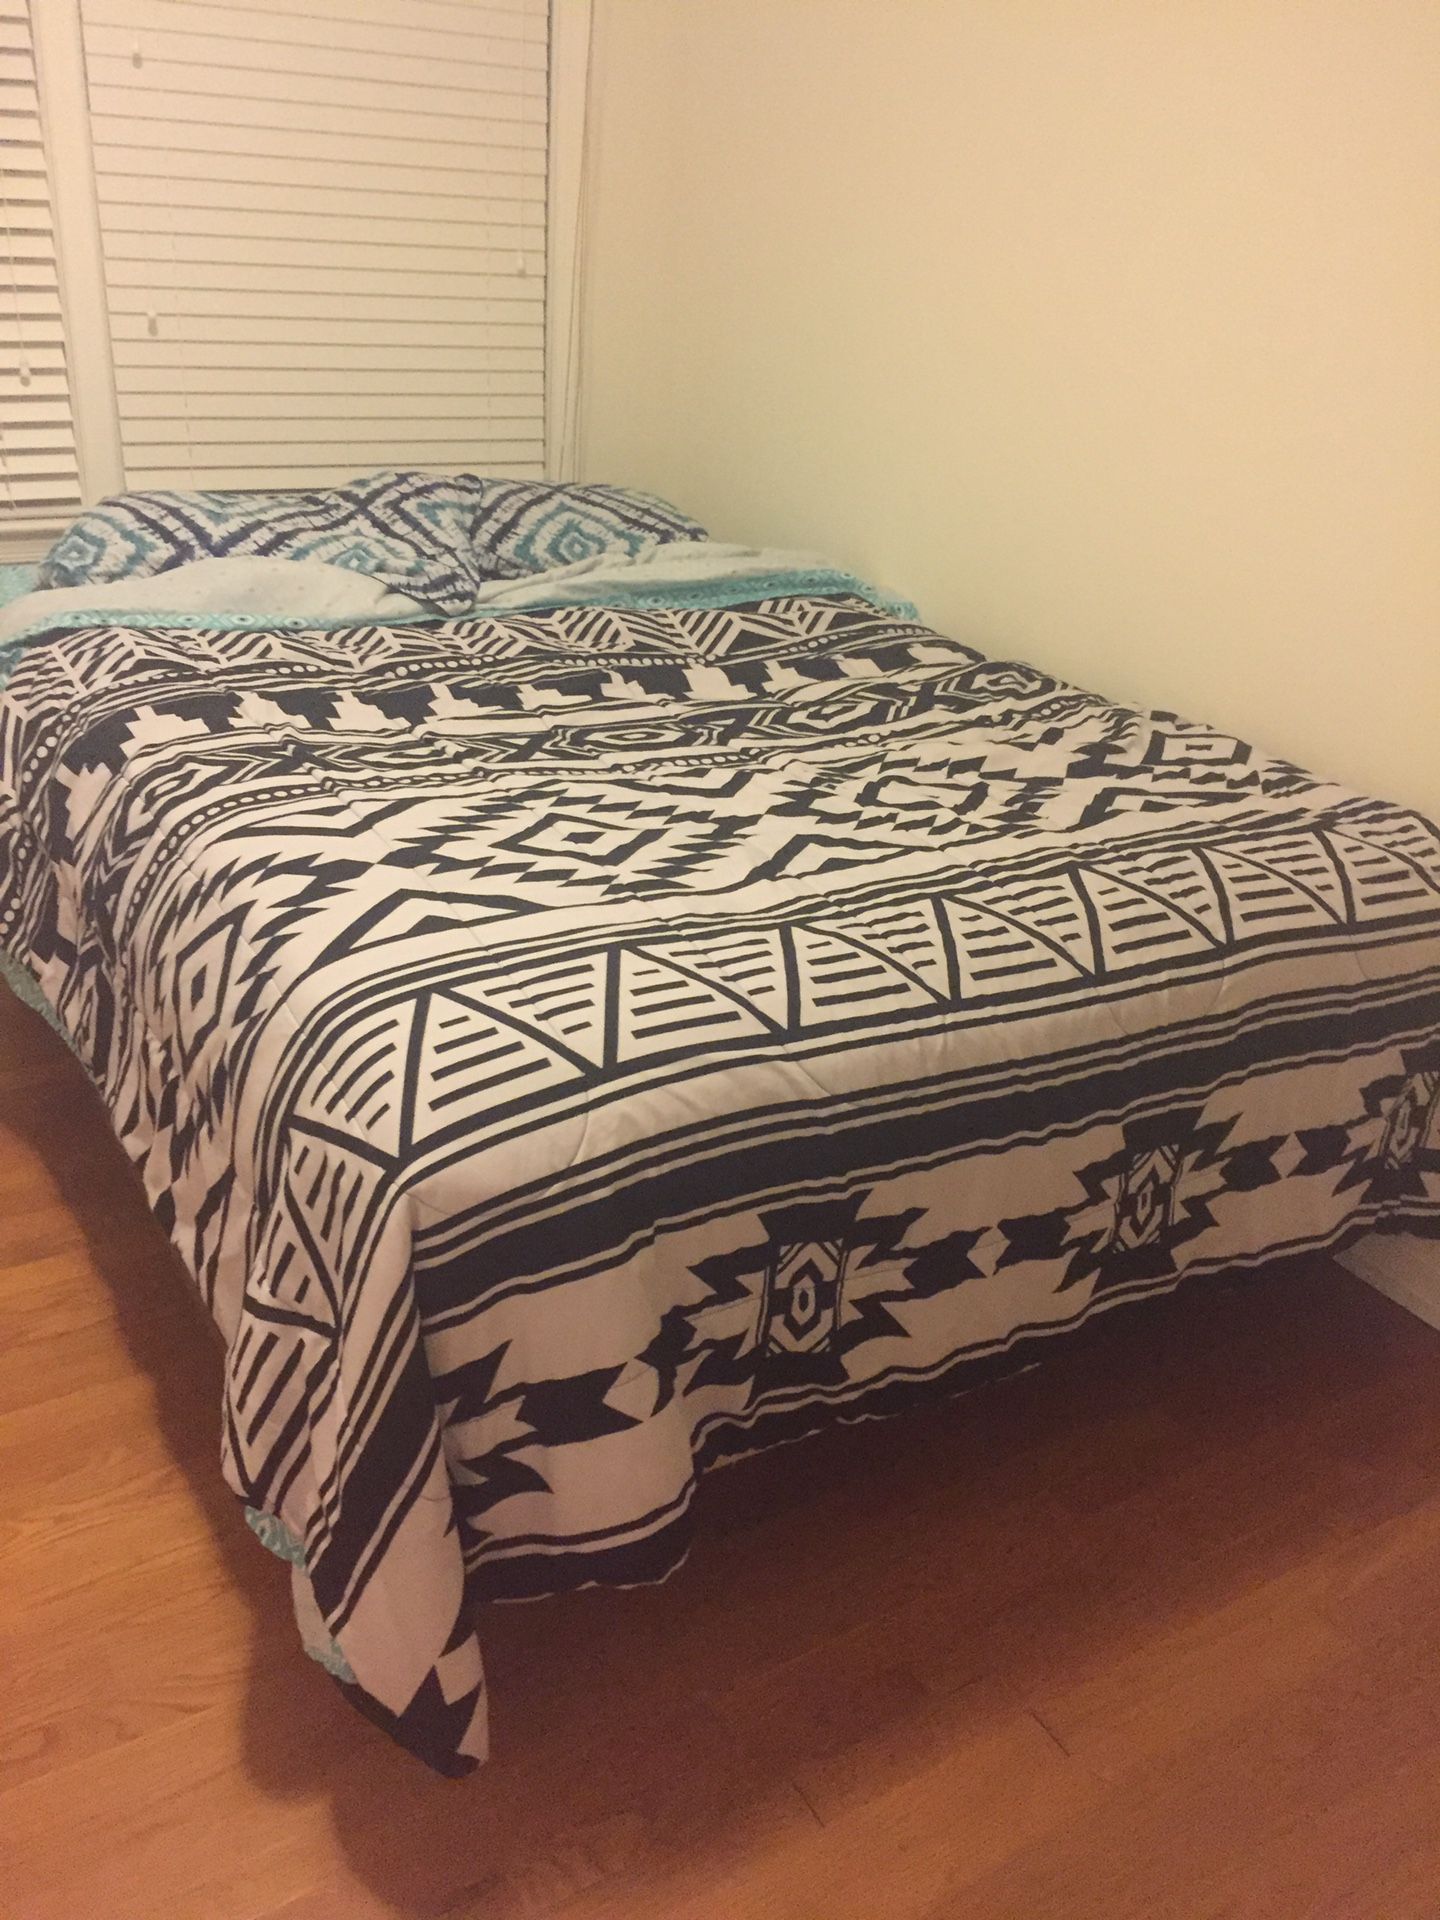 Queen size bed with railing